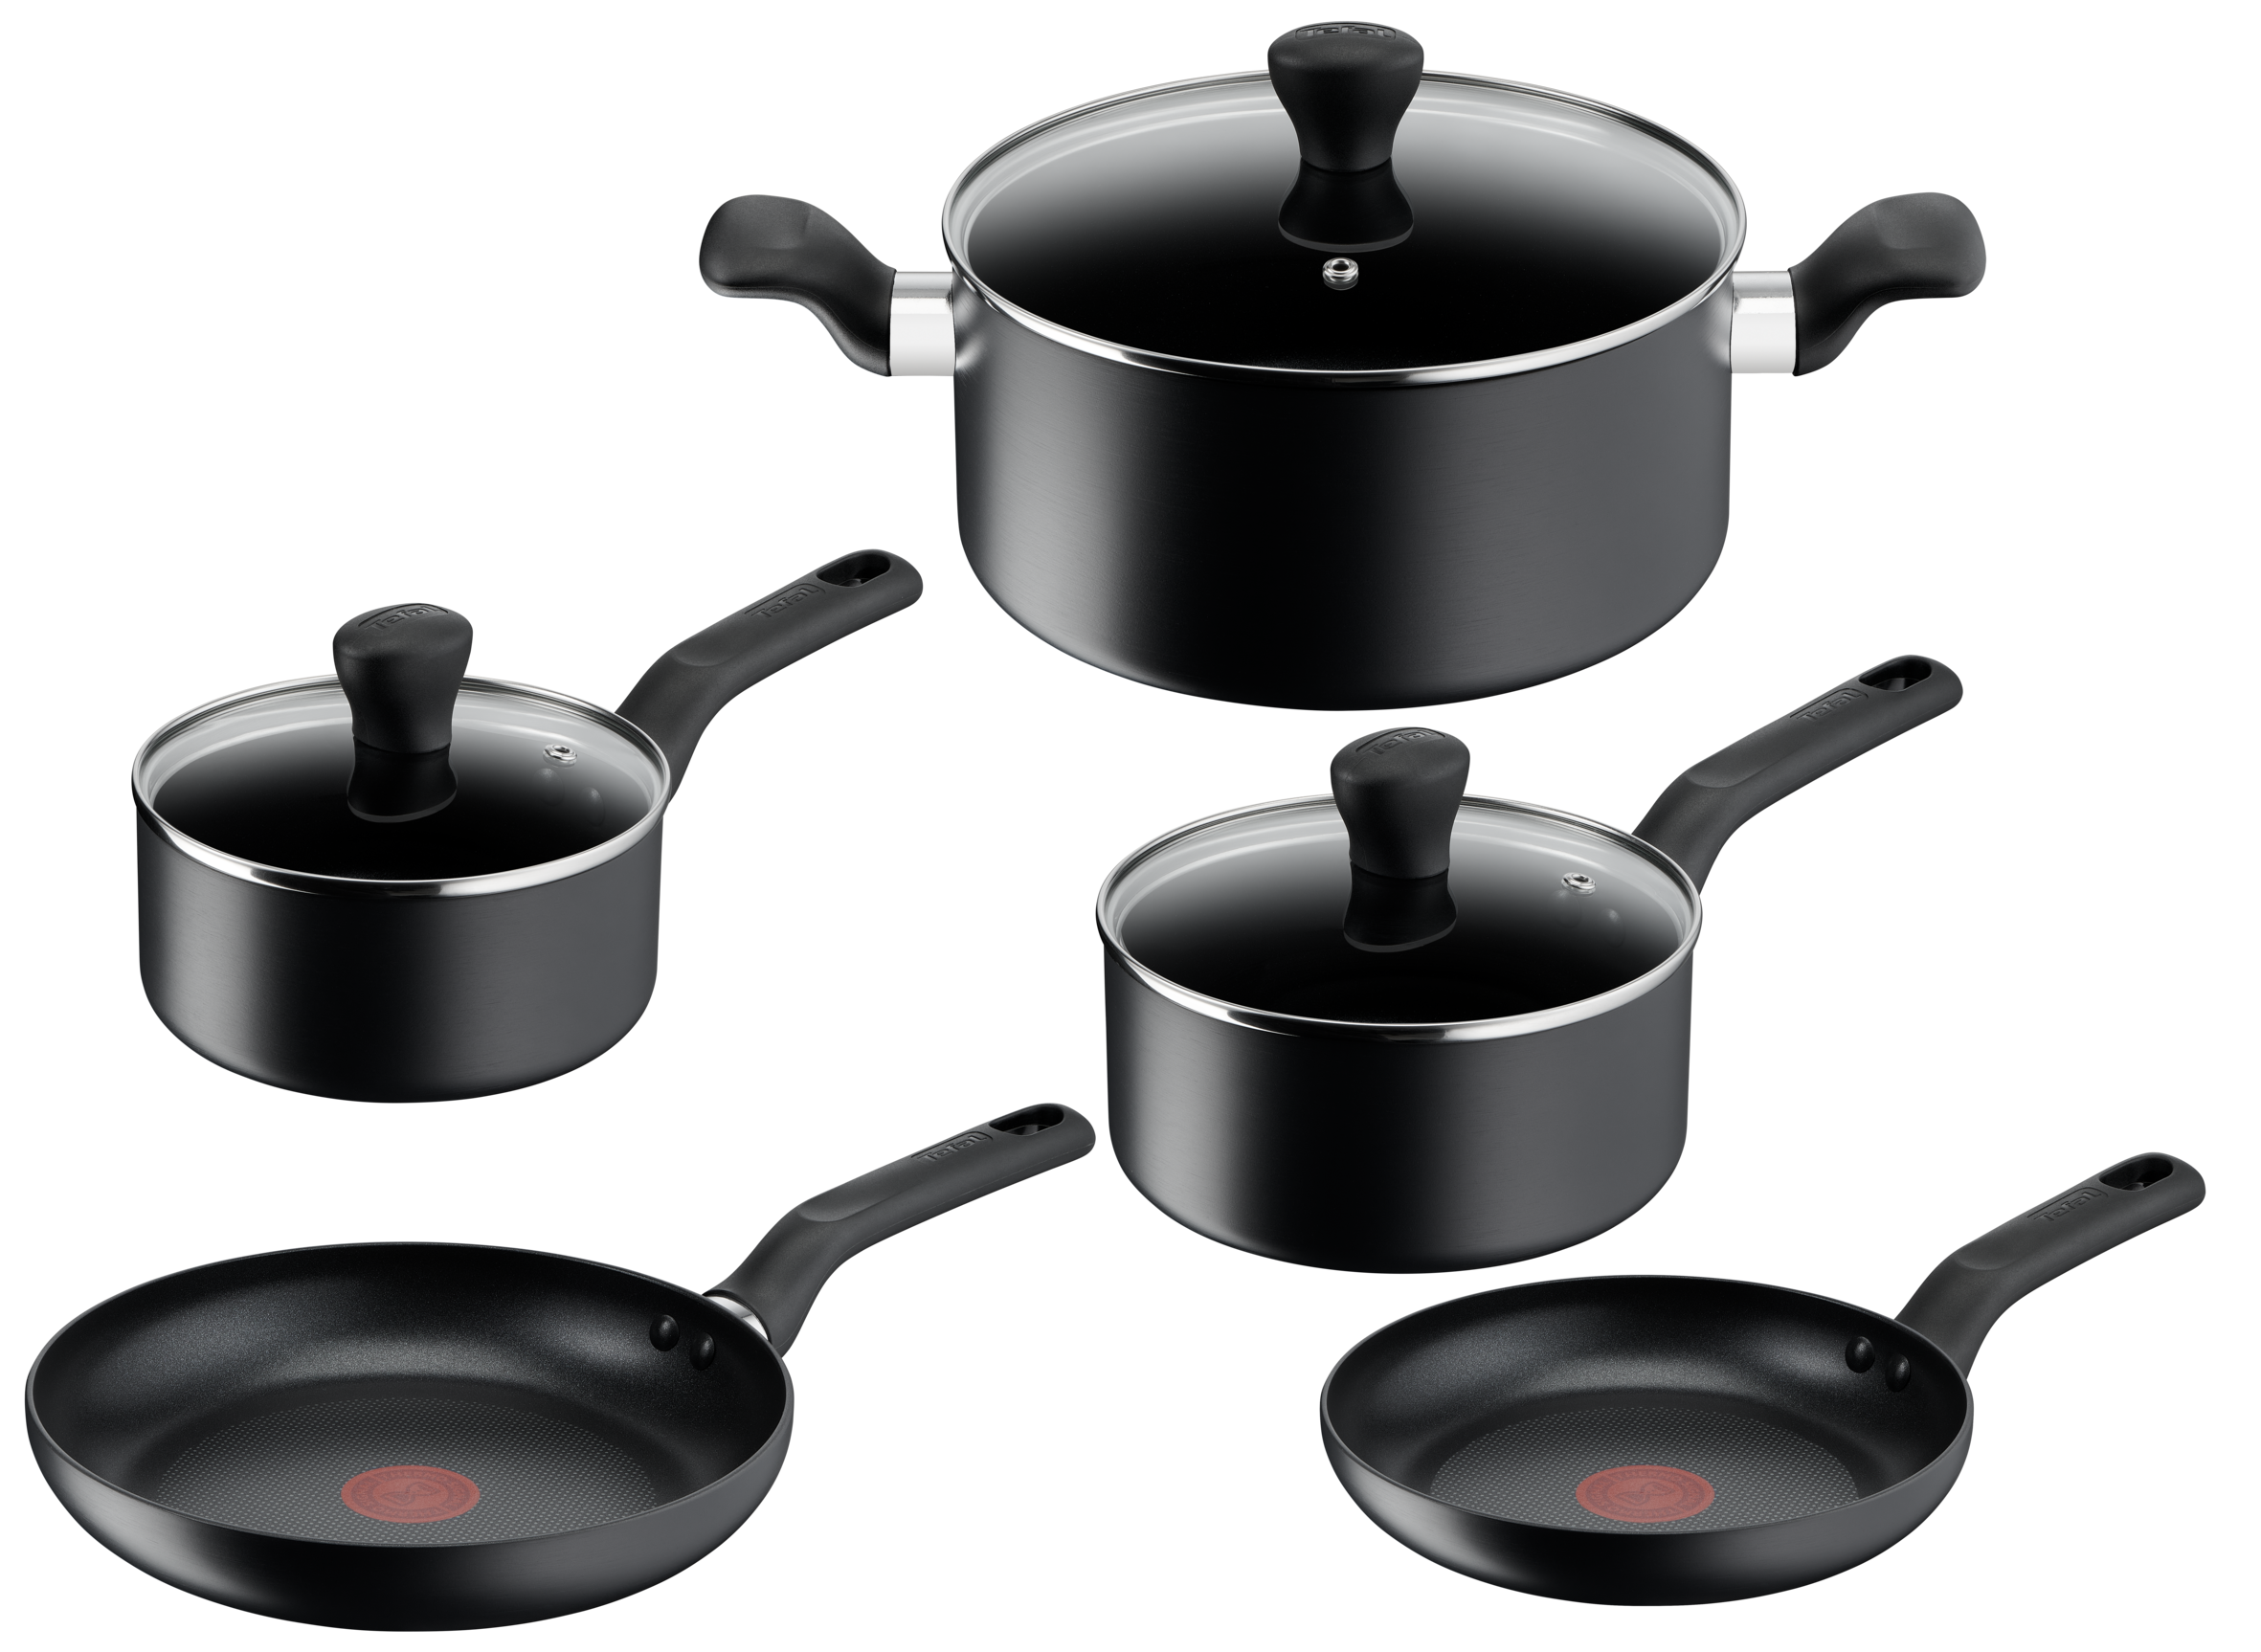 Tefal Specialty Premium Hard Anodised Induction Non-Stick 5 Piece Cook Set